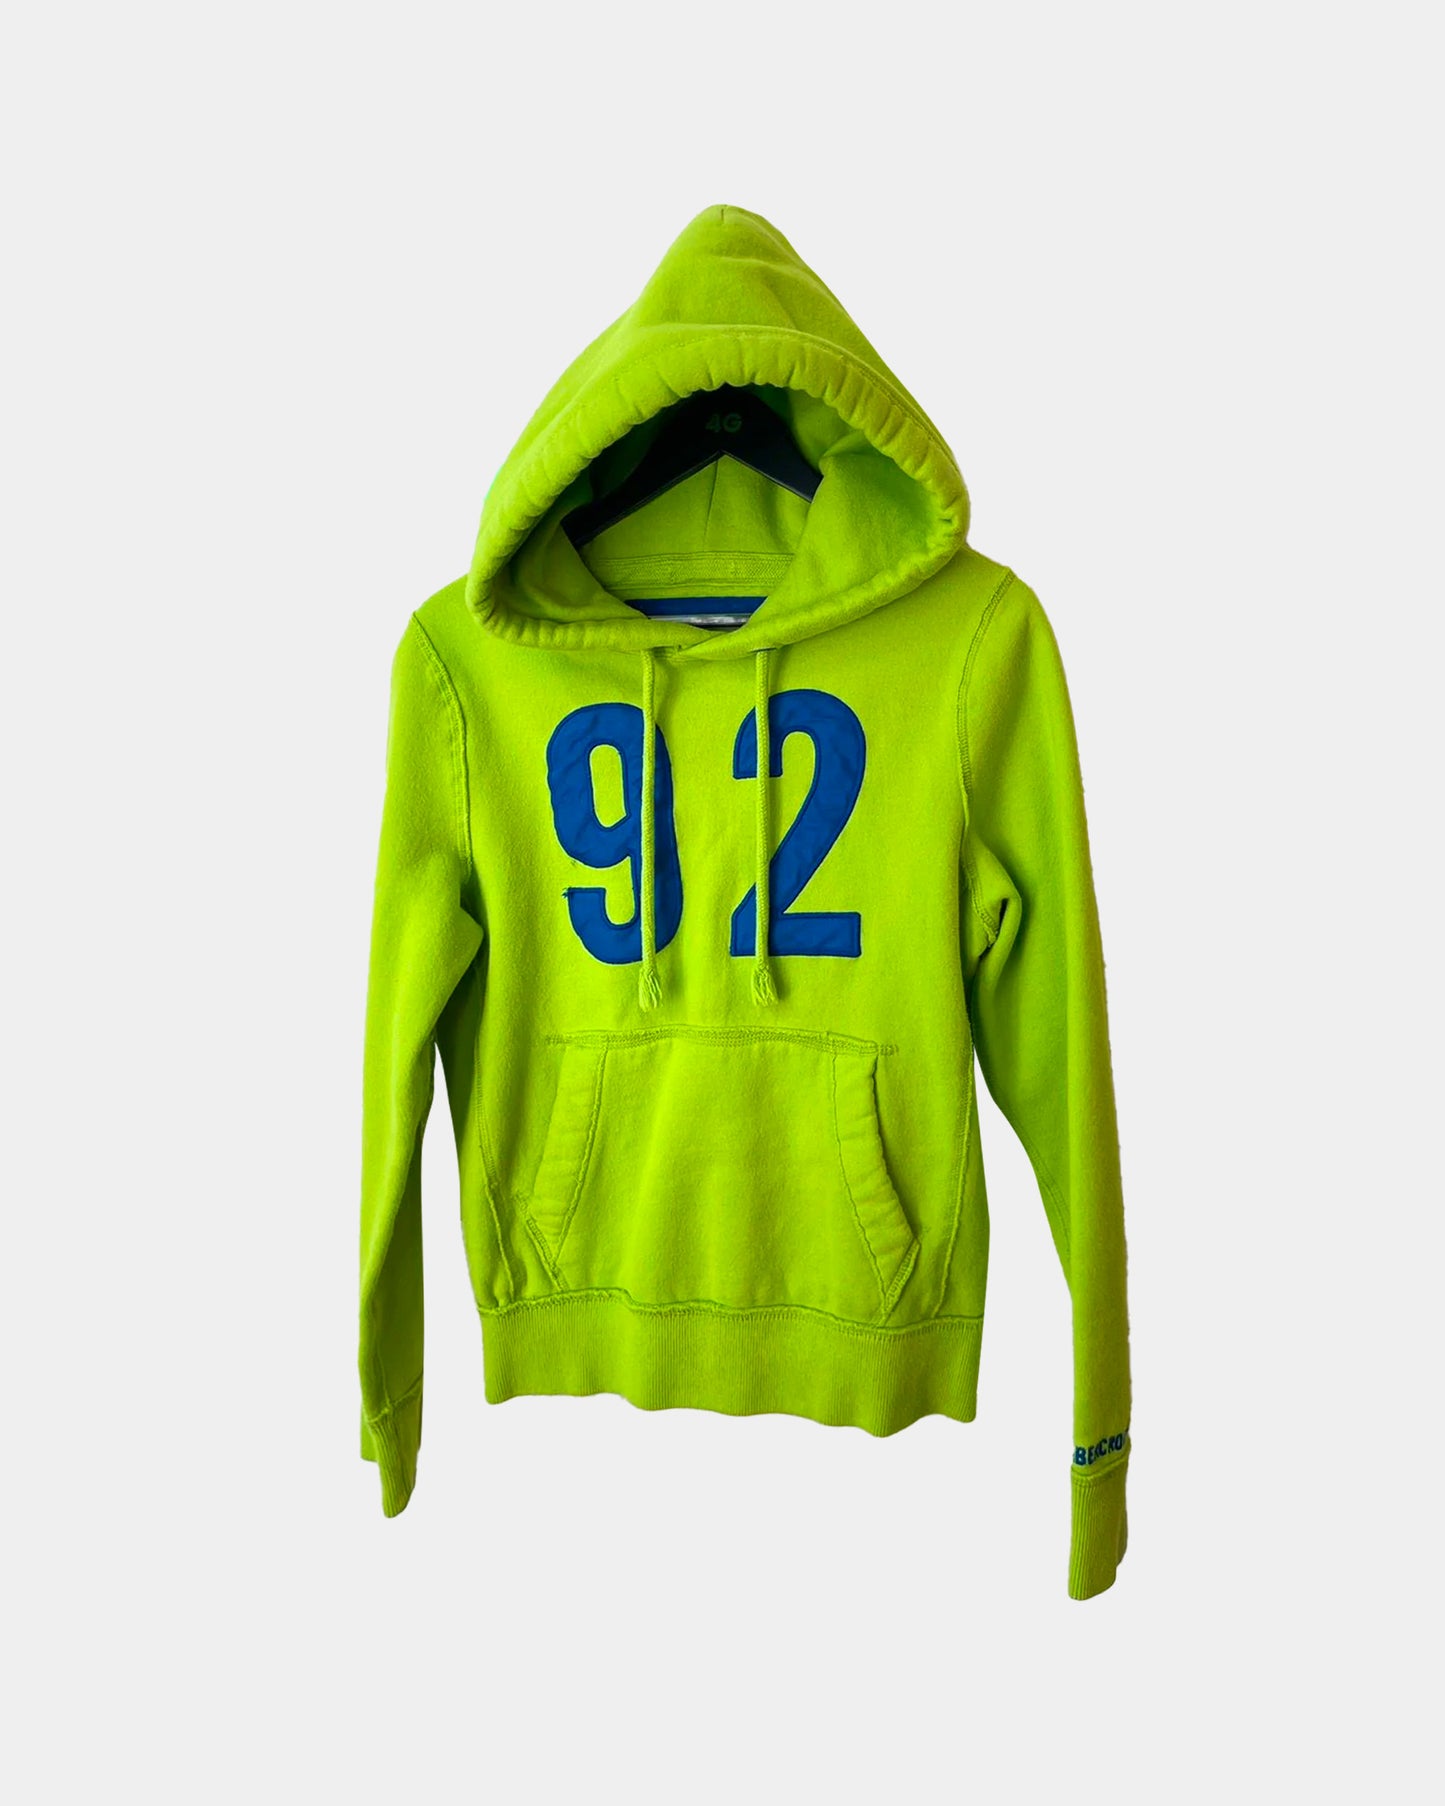 Vintage Abercrombie THRASHED LIME NEON GREEN HOODIE M/L